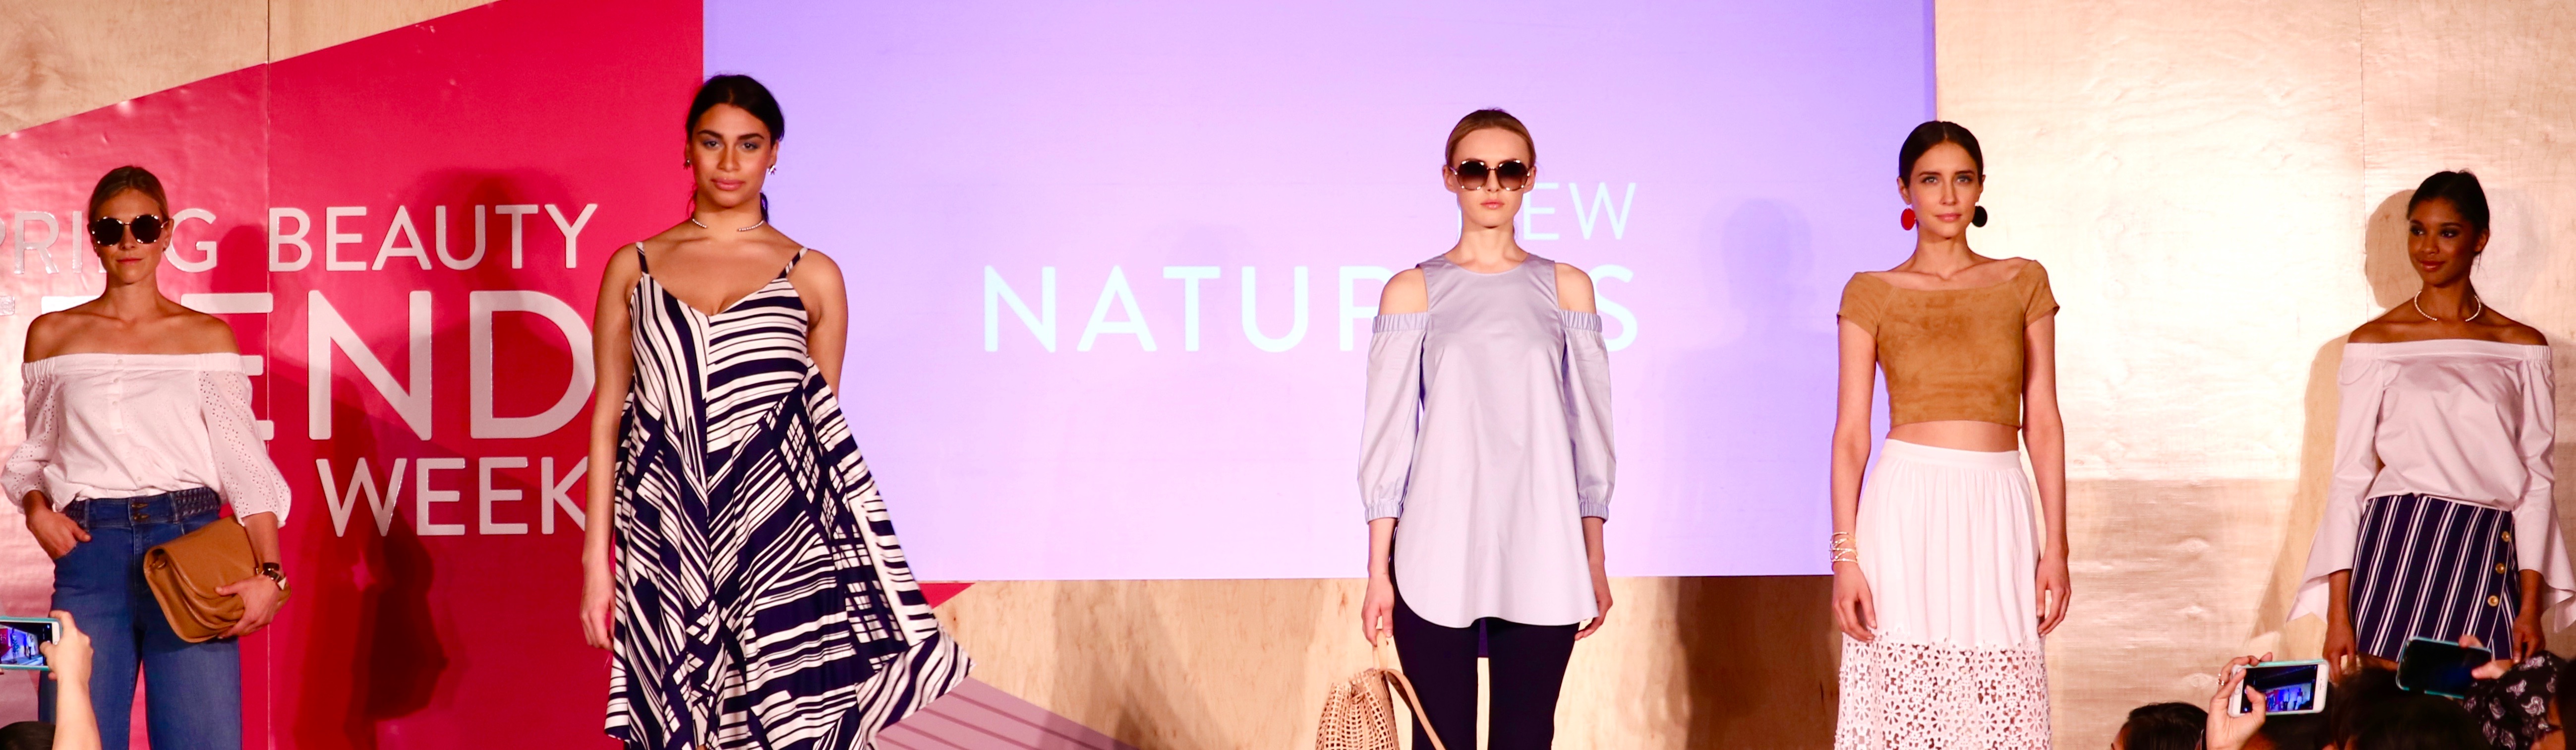 New Naturals Nordstrom Beauty Trend Show 2016 Spring Bowtiful Life 2